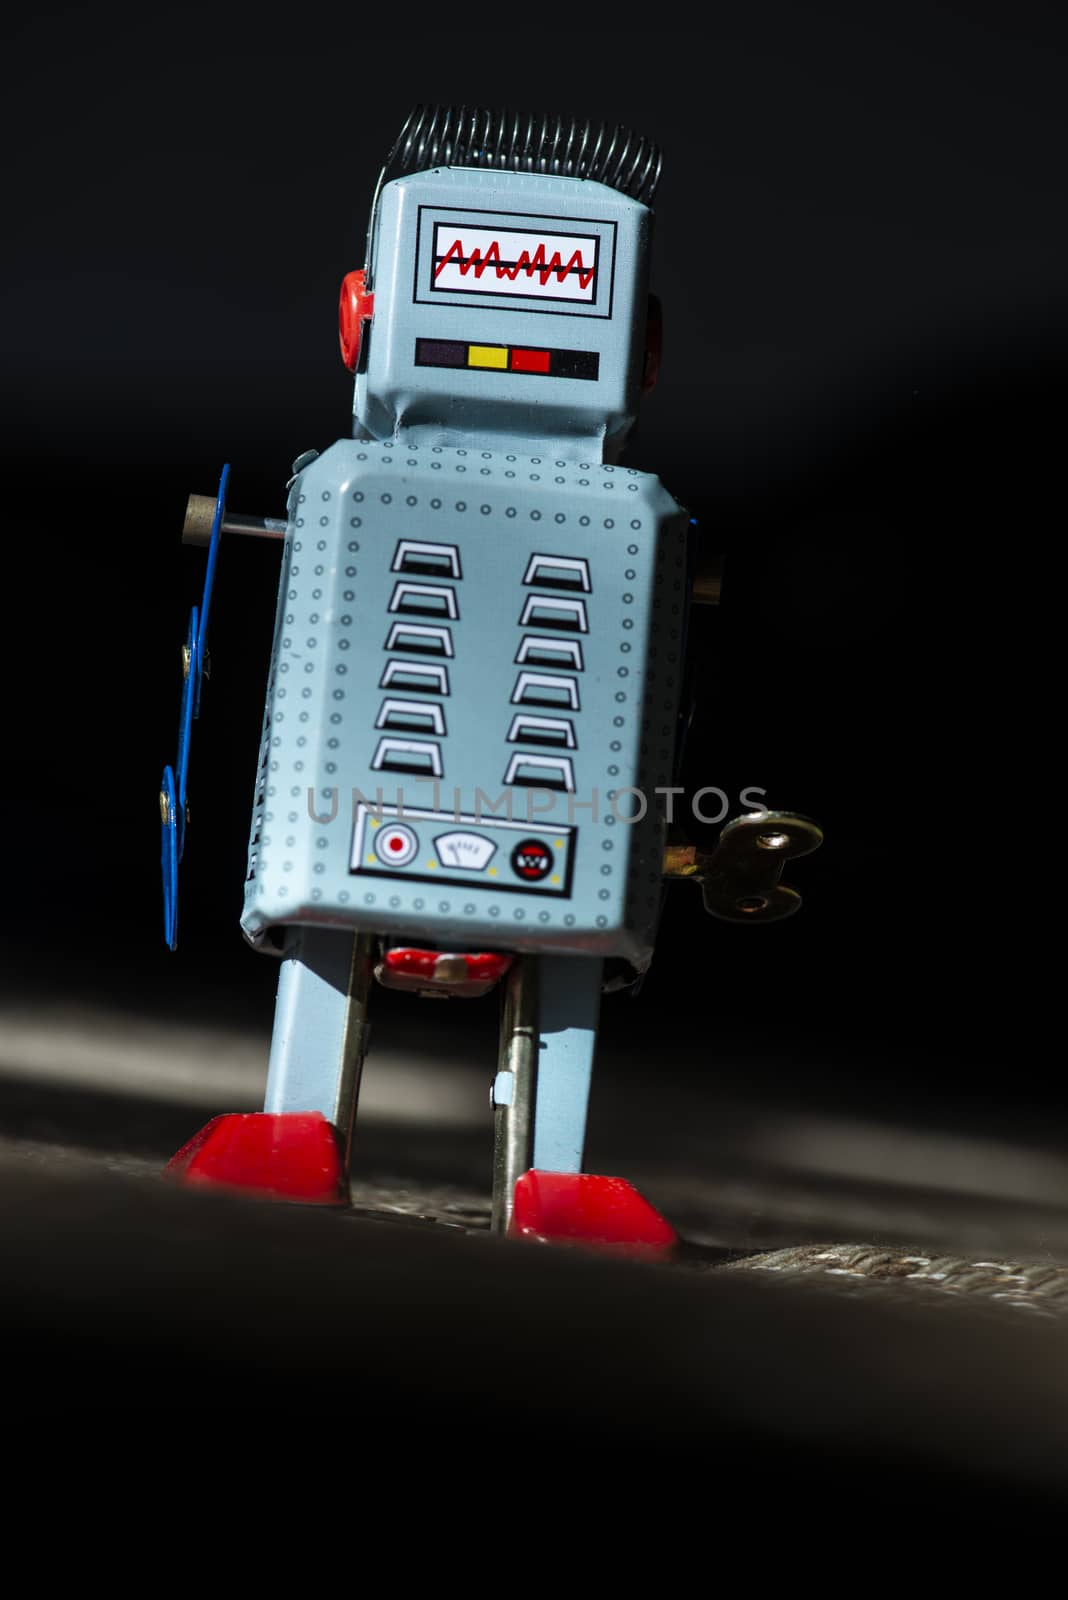 Vintage metal blue robot toy on sunlight. Futuristic concept with small mechanical robot toy walking on cloth surface. Painted eyes and electronic dashboard. Mechanical toy key. Hard light and shadows.